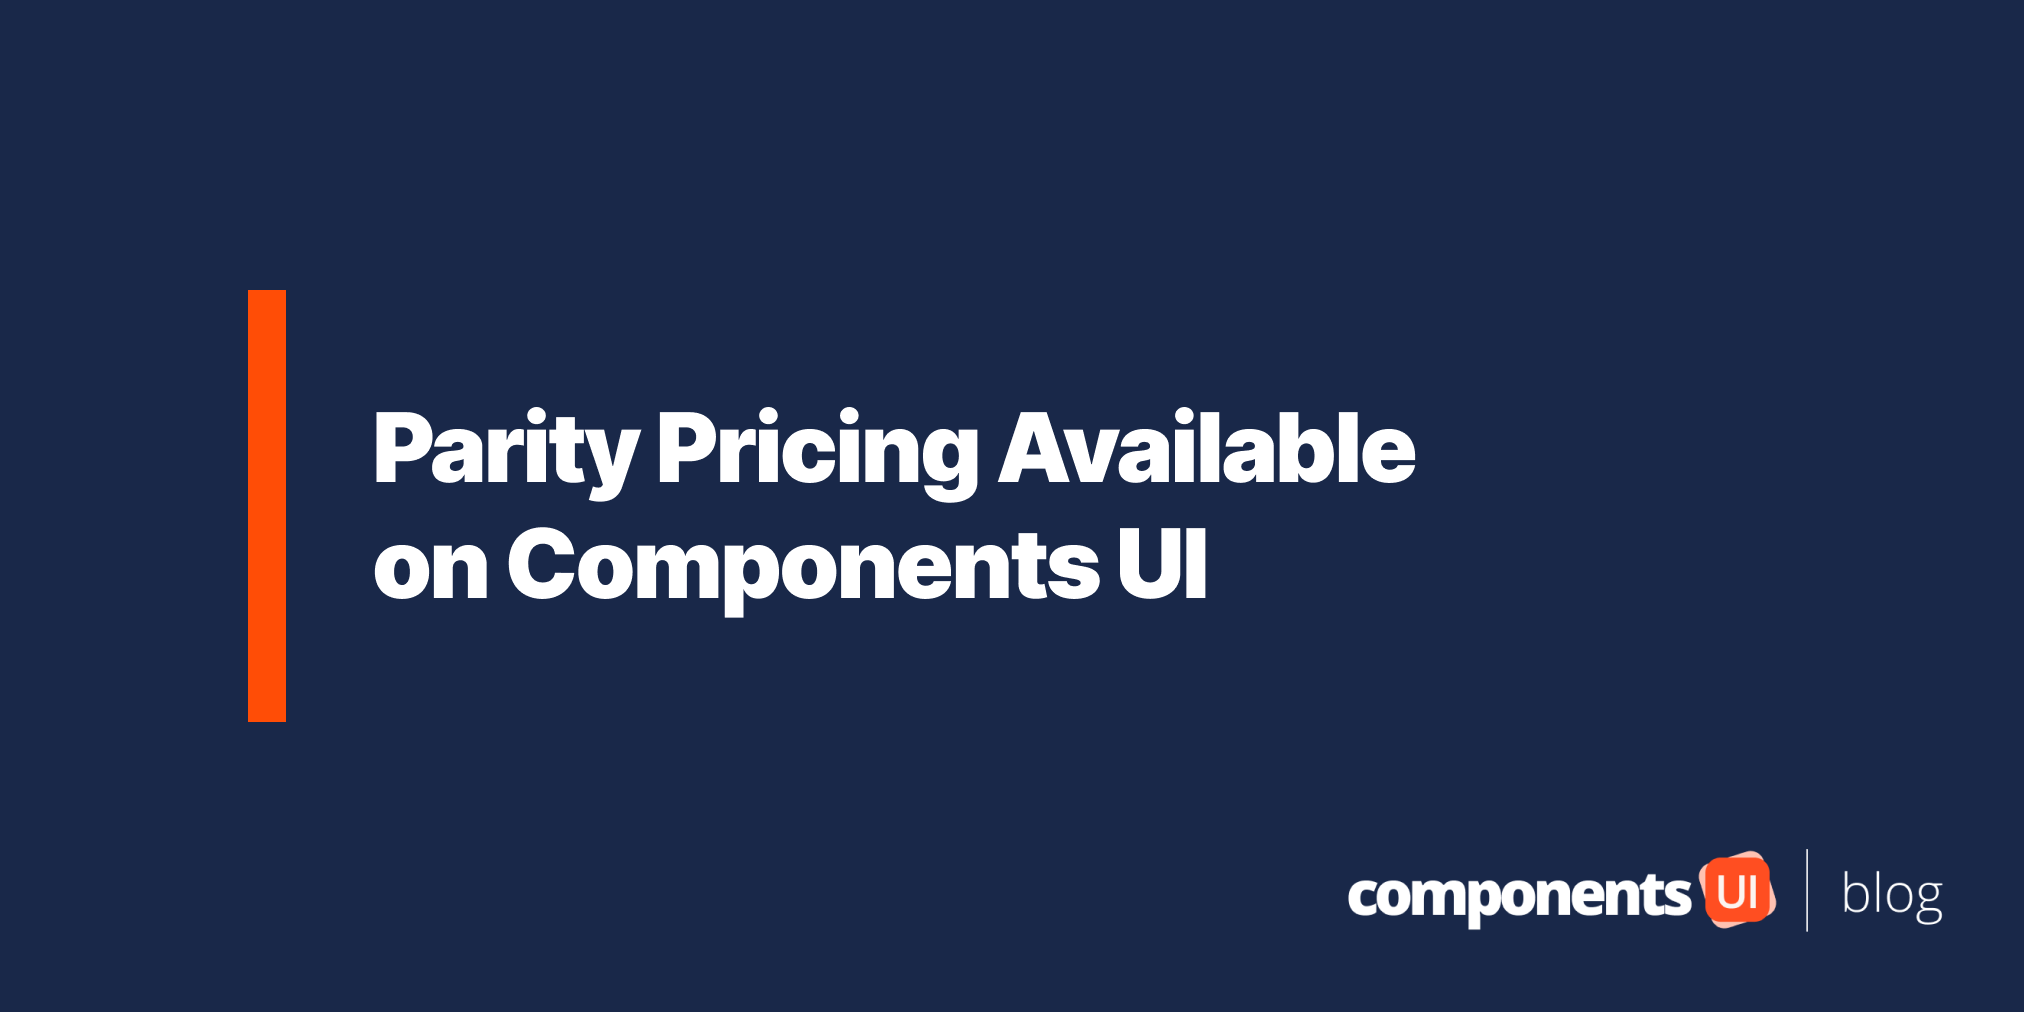 parity-pricing-on-components-ui